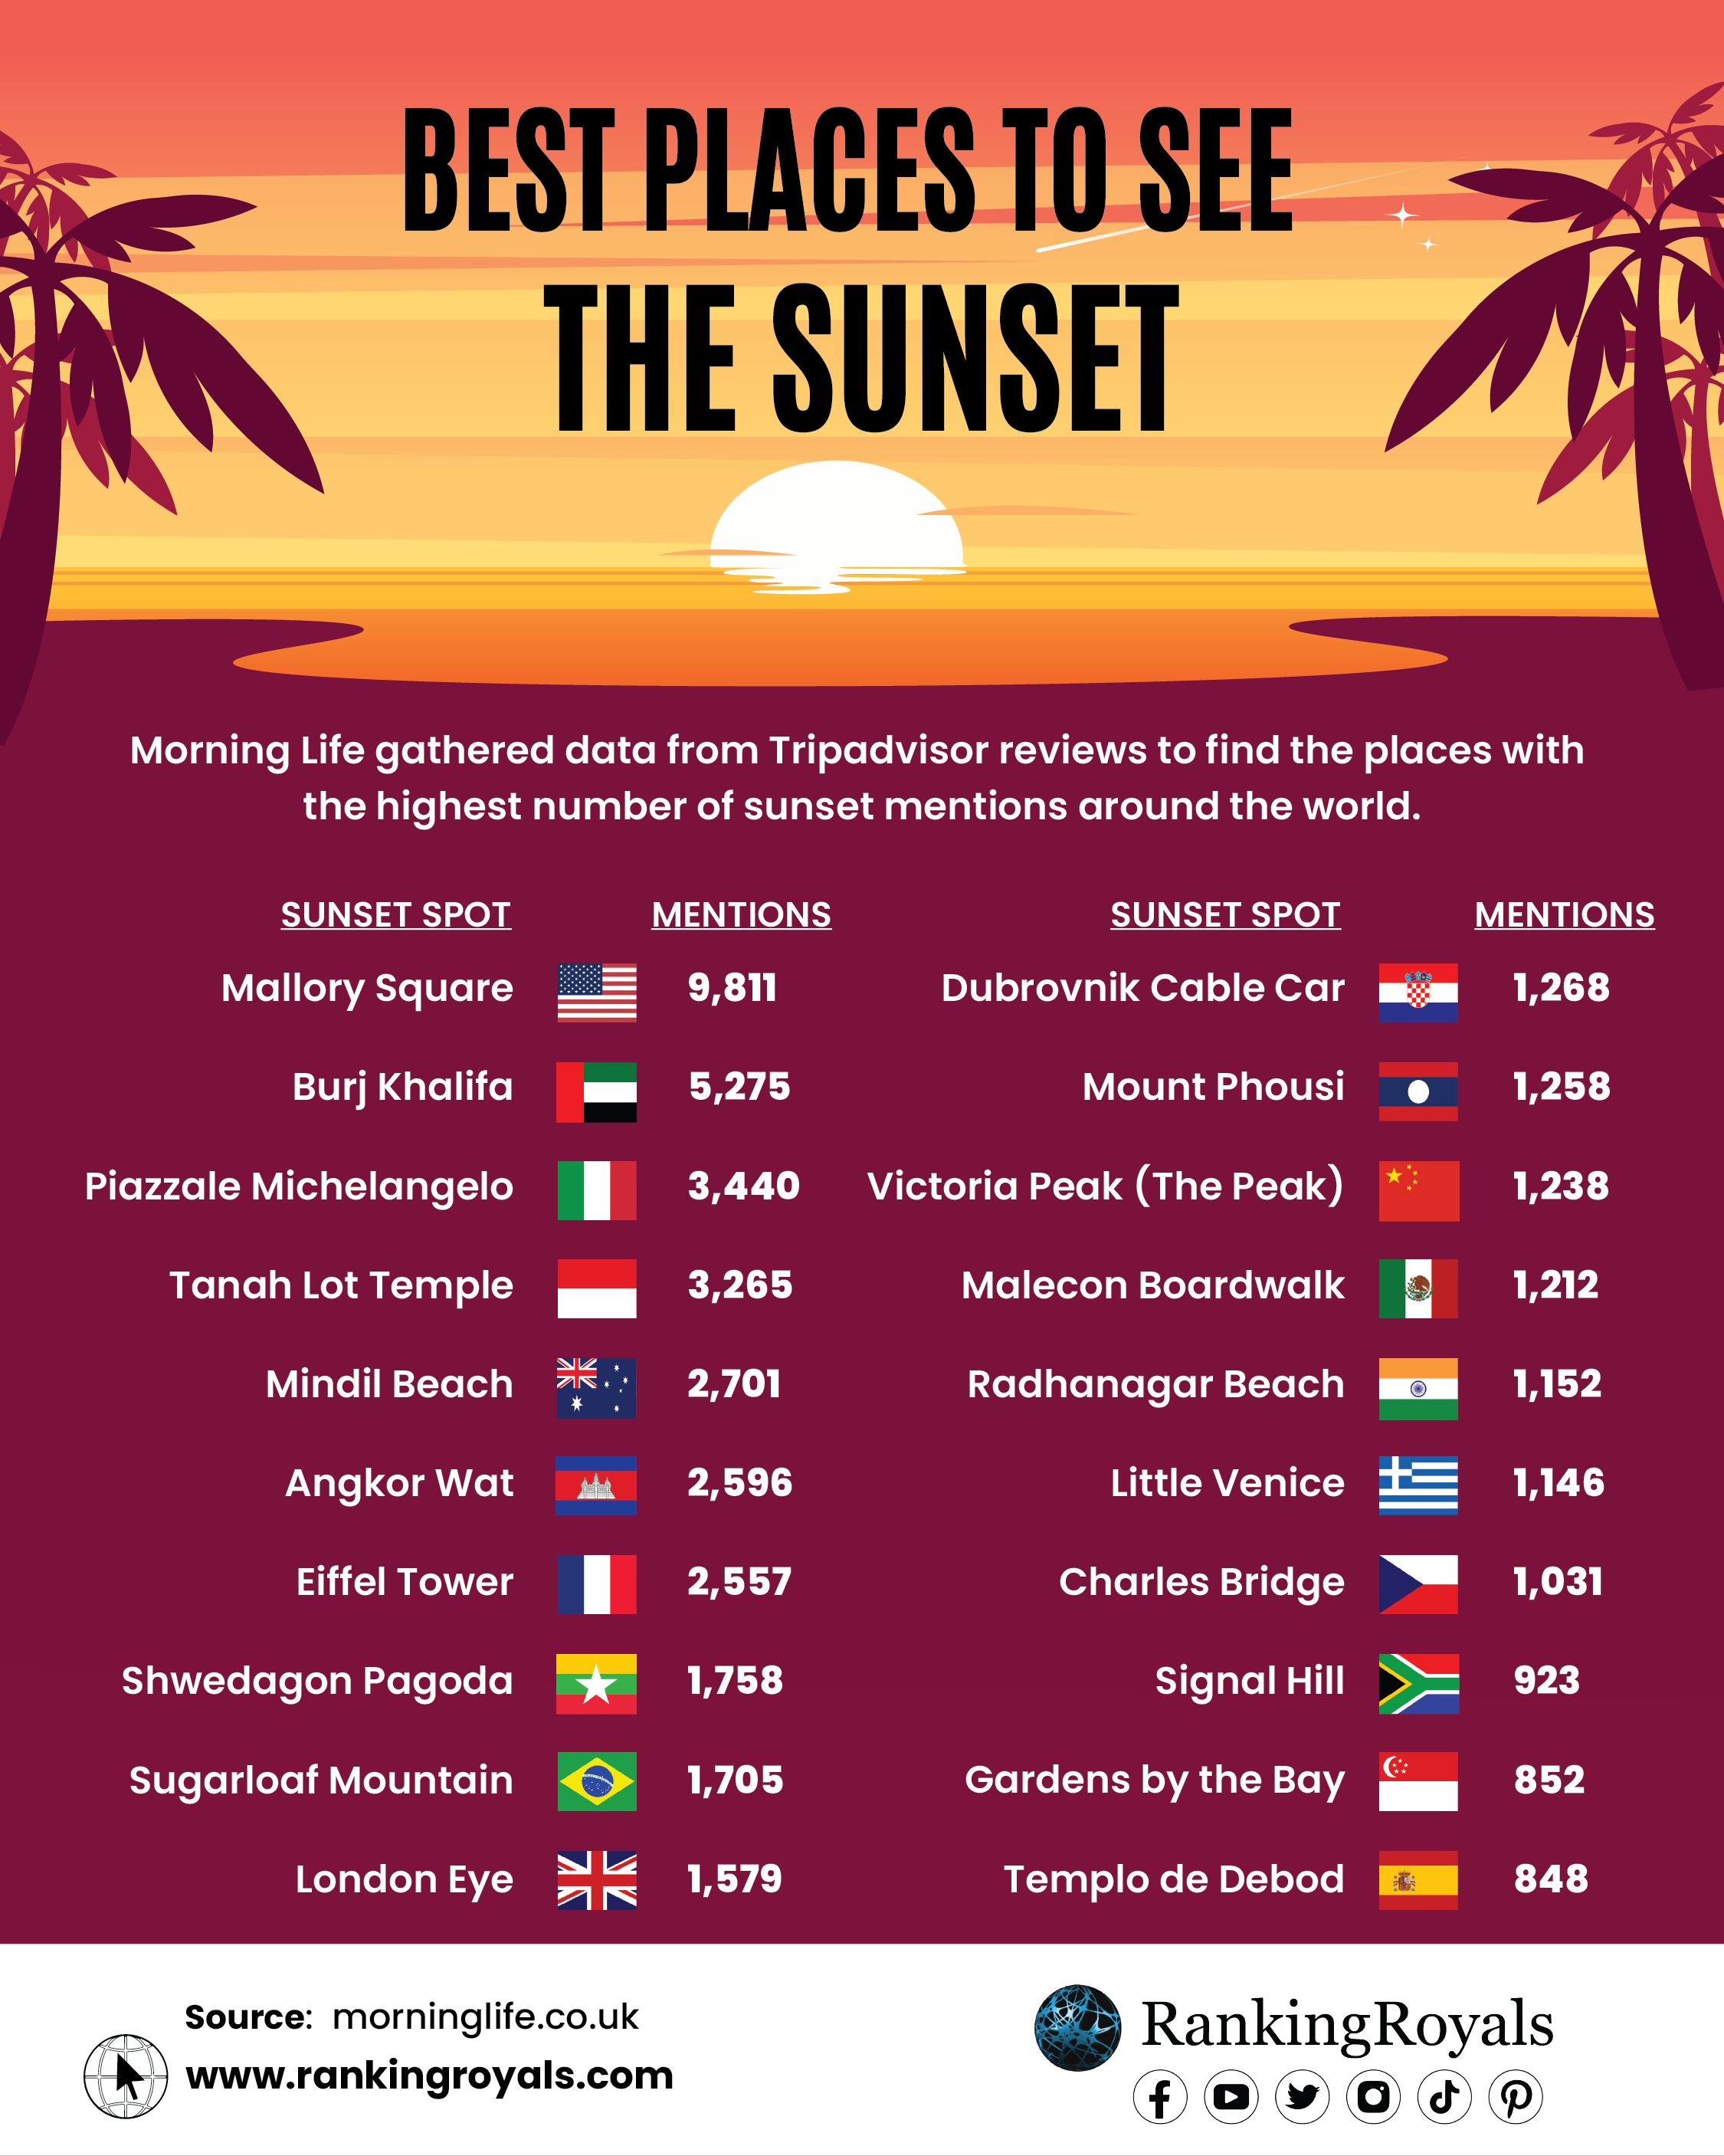 Best Places to See the Sunset